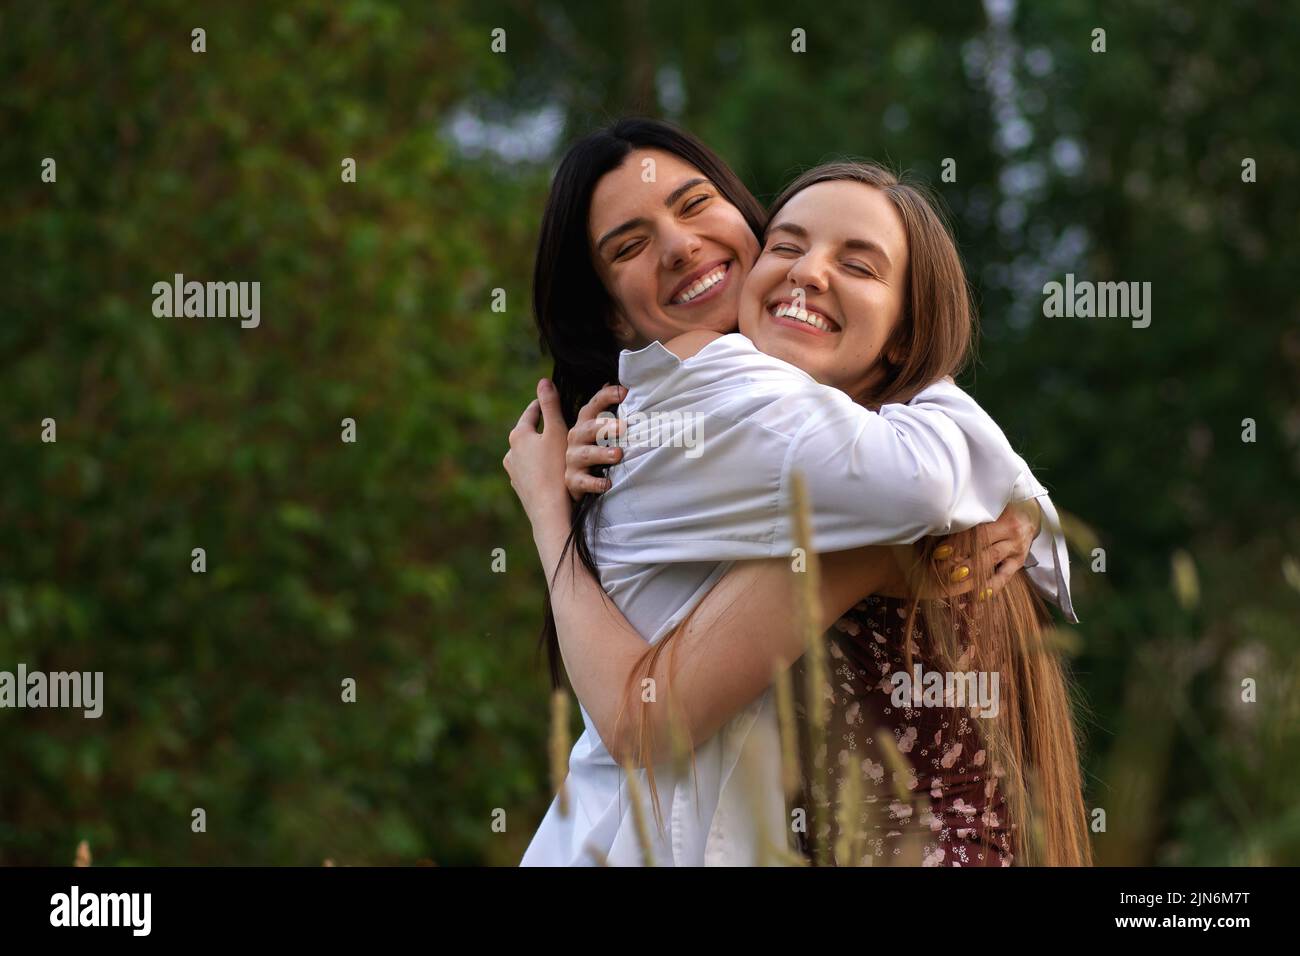 Two Girls with Long Hair Hugging Each Other and Laughing Stock Photo